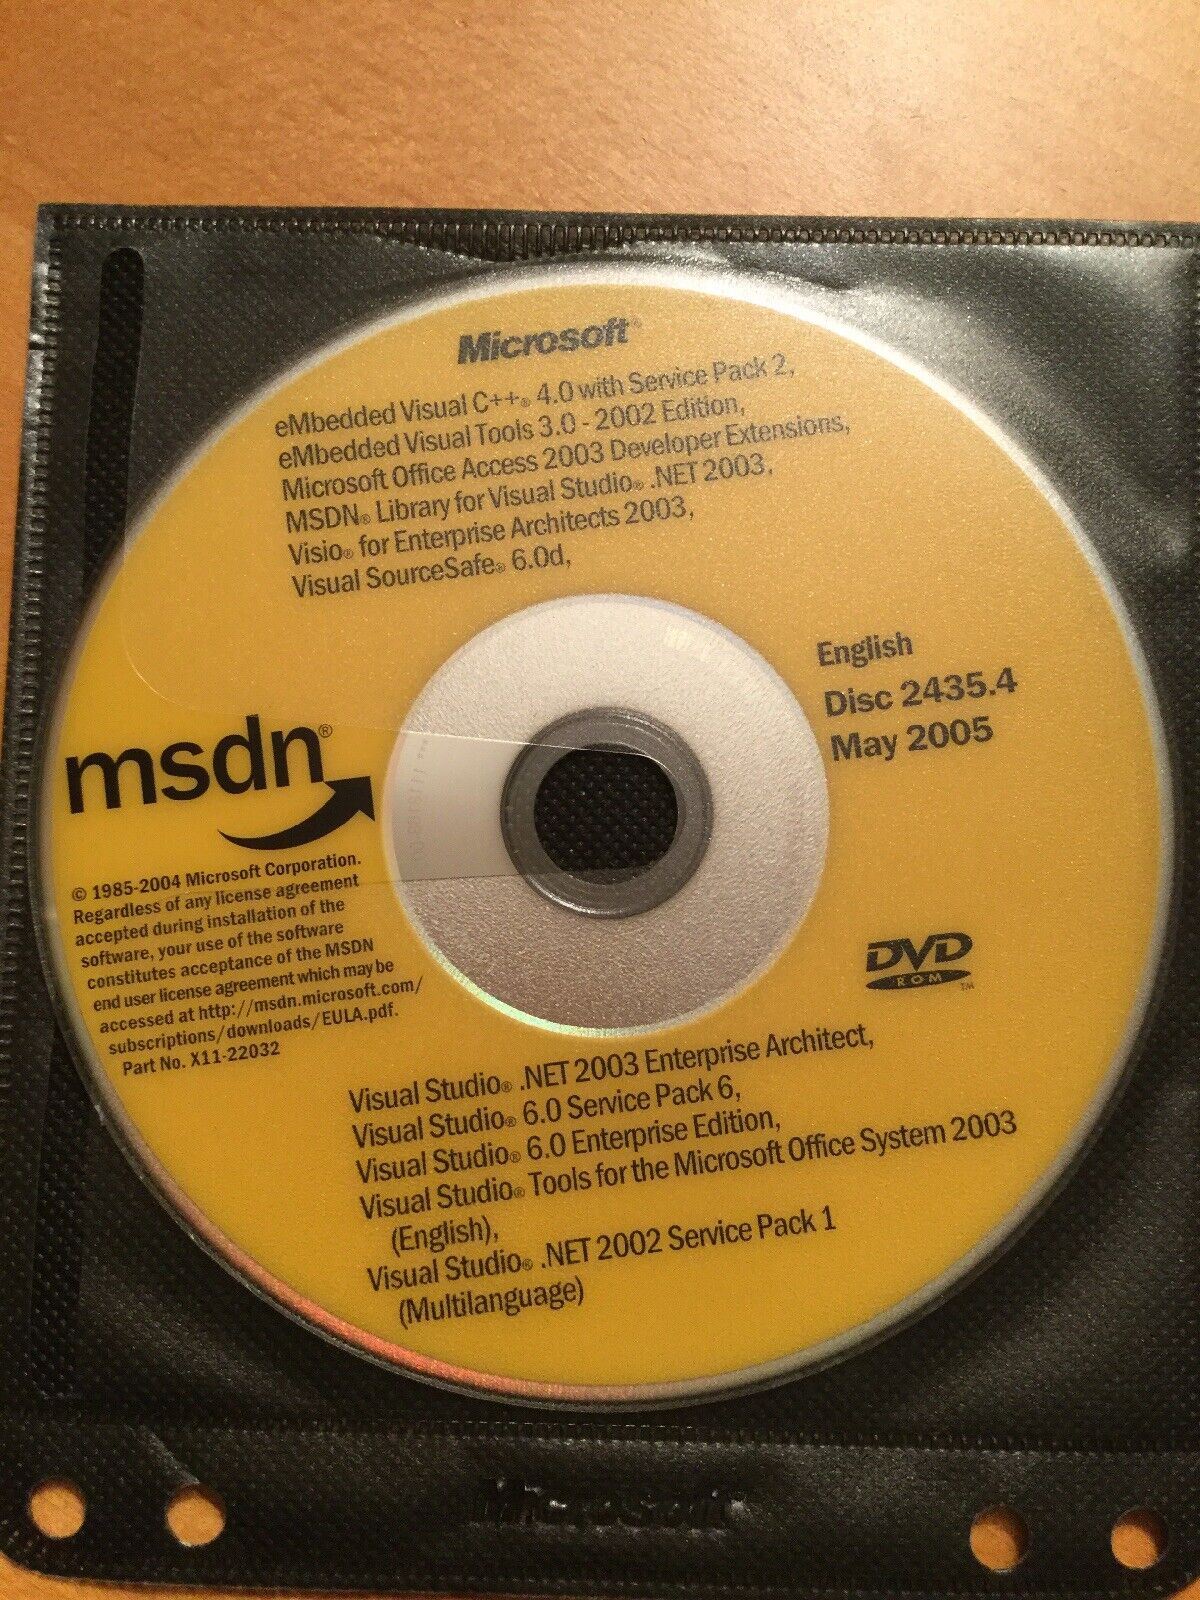 3 CDs Full Of Great Software received with MSDN. Never Used. Read Details/pics